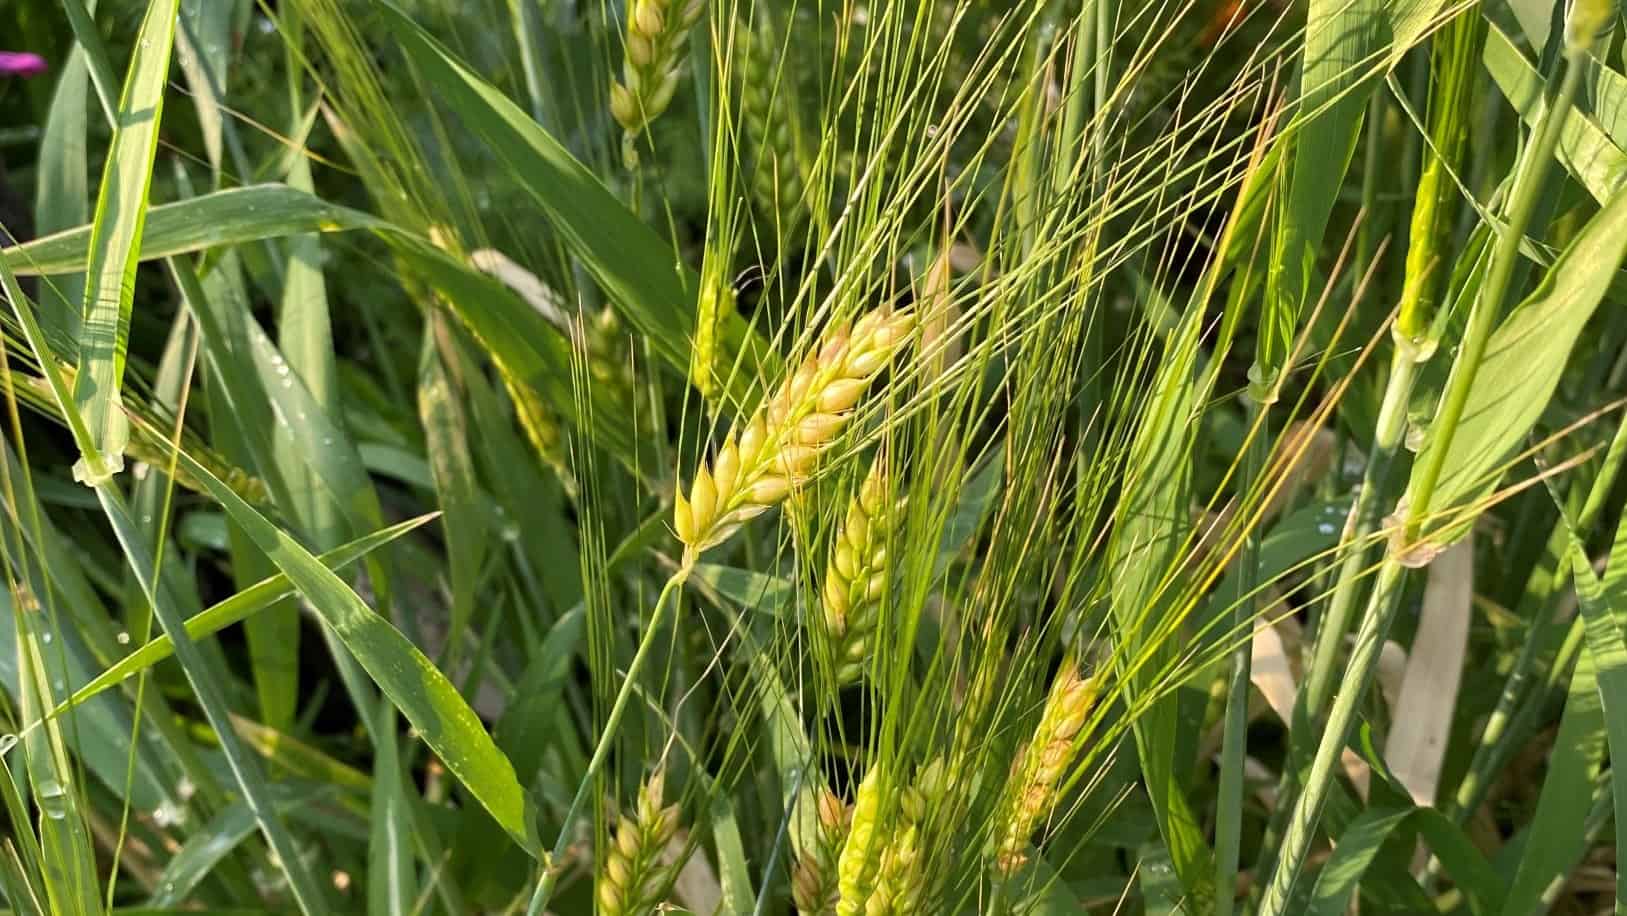 ©2021 Shelley S. Cramm Barley heads nearly ripe catch the morning light in a Texas garden